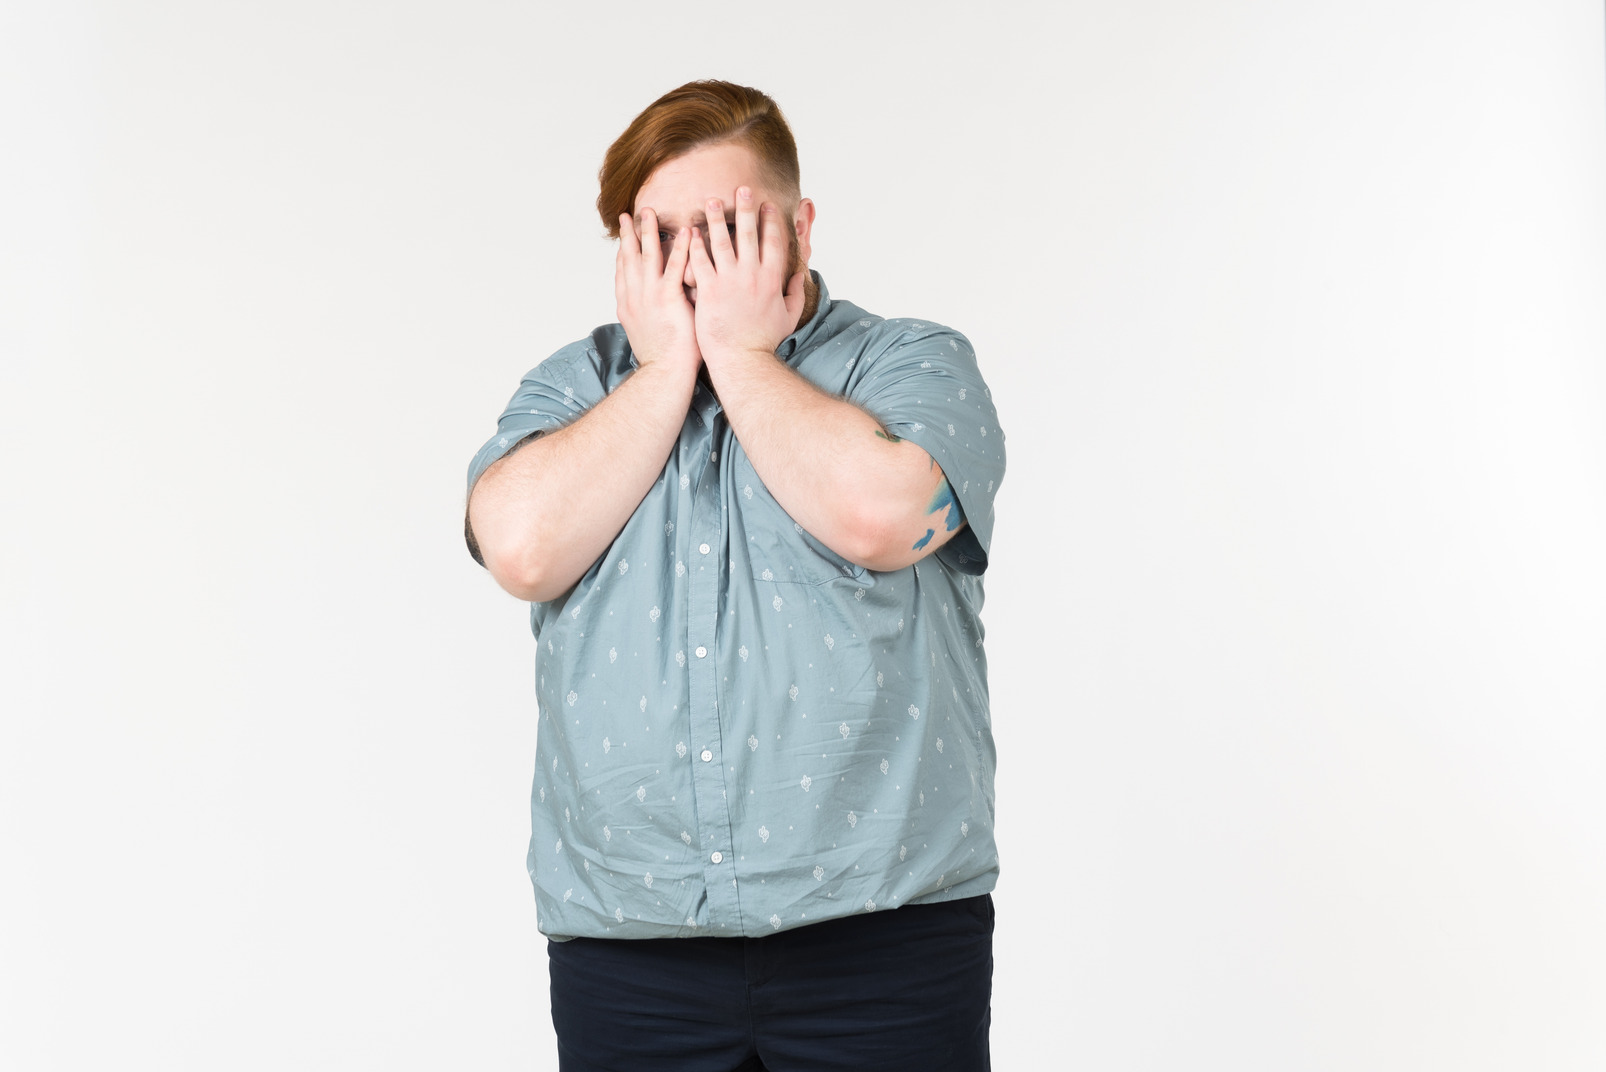 Sad young overweight man closing his face with hands